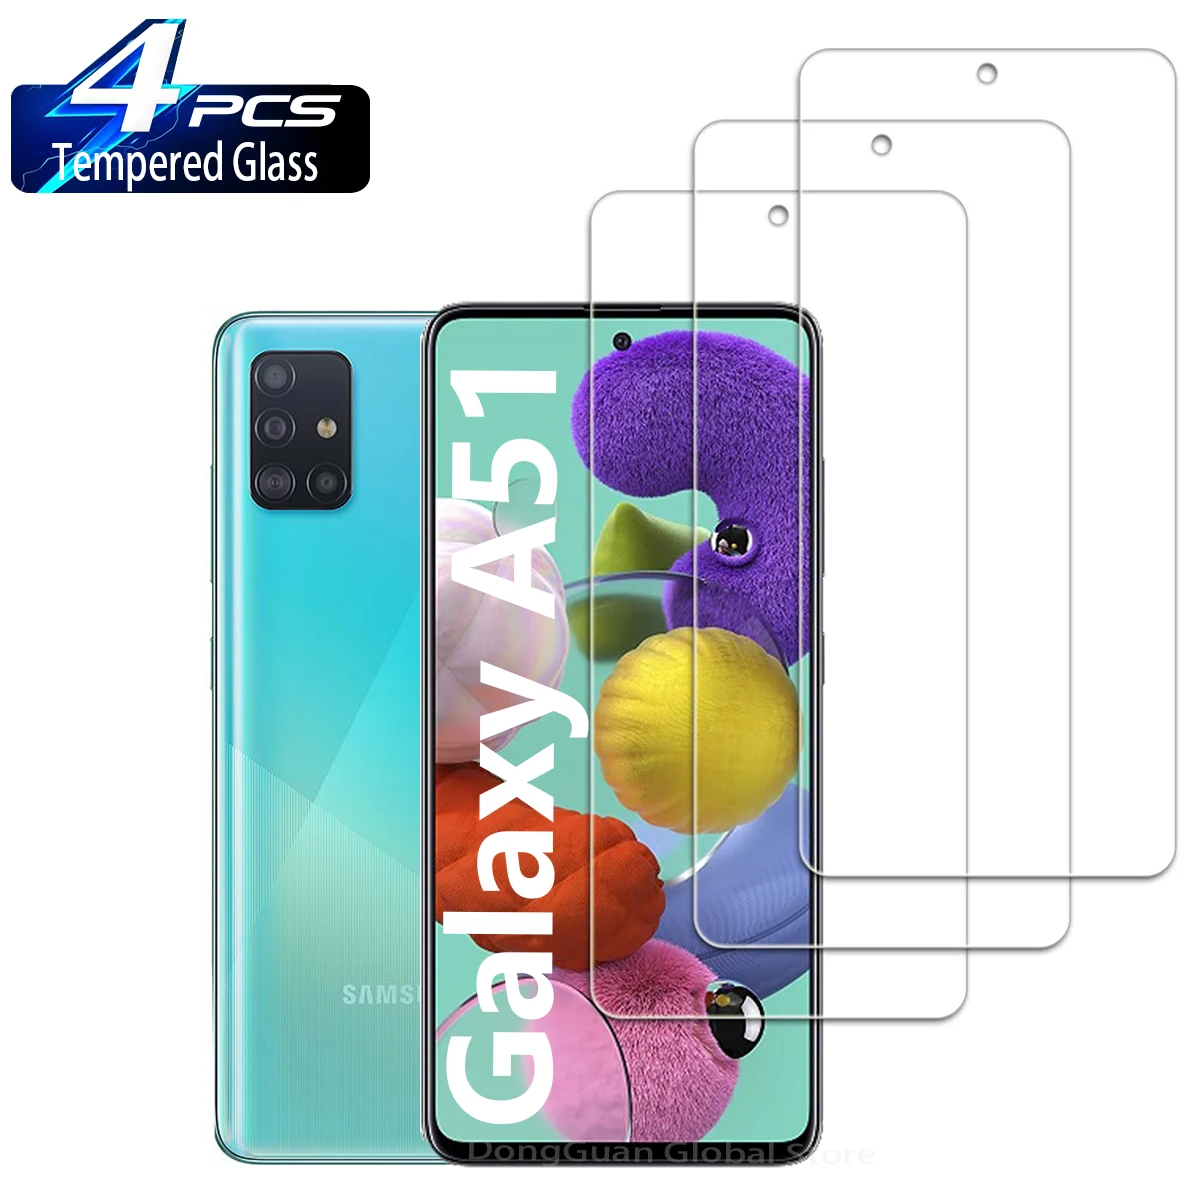 2/4Pcs Tempered Glass For Samsung Galaxy A51 Screen Protector Glass Film 9d glass galaxy a32 4g tempered glass for samsung a72 a52 a71 a51 screen protector samsung galaxy a32 5g a 32 protective film